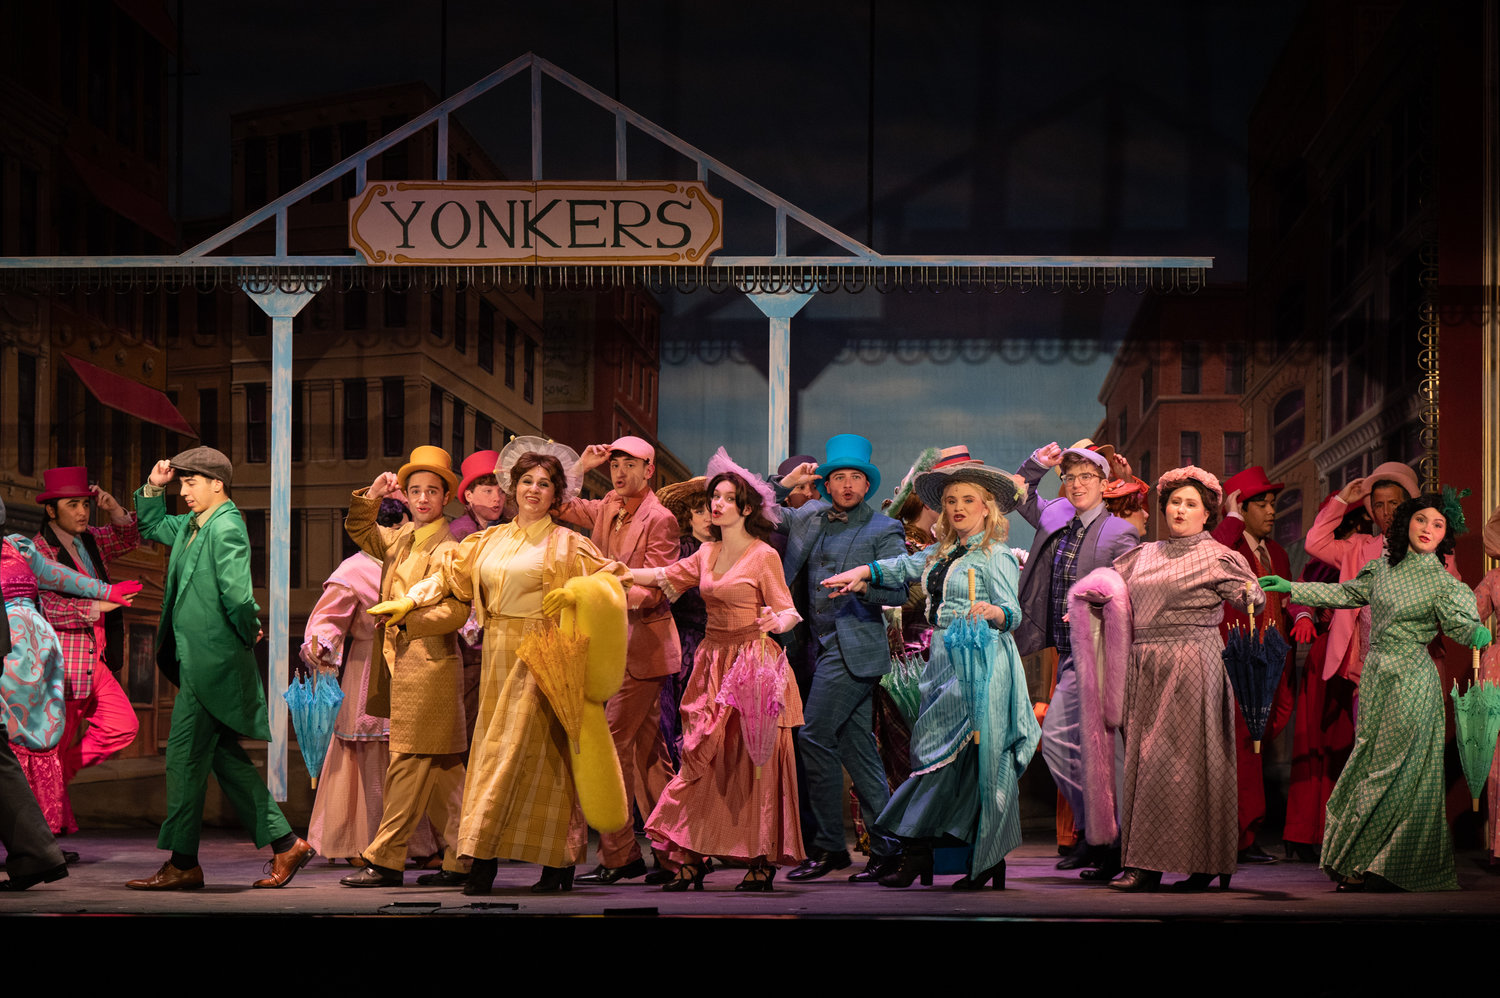 Only the full colors of the rainbow could capture the spectacle that is the Golden Age of musicals.